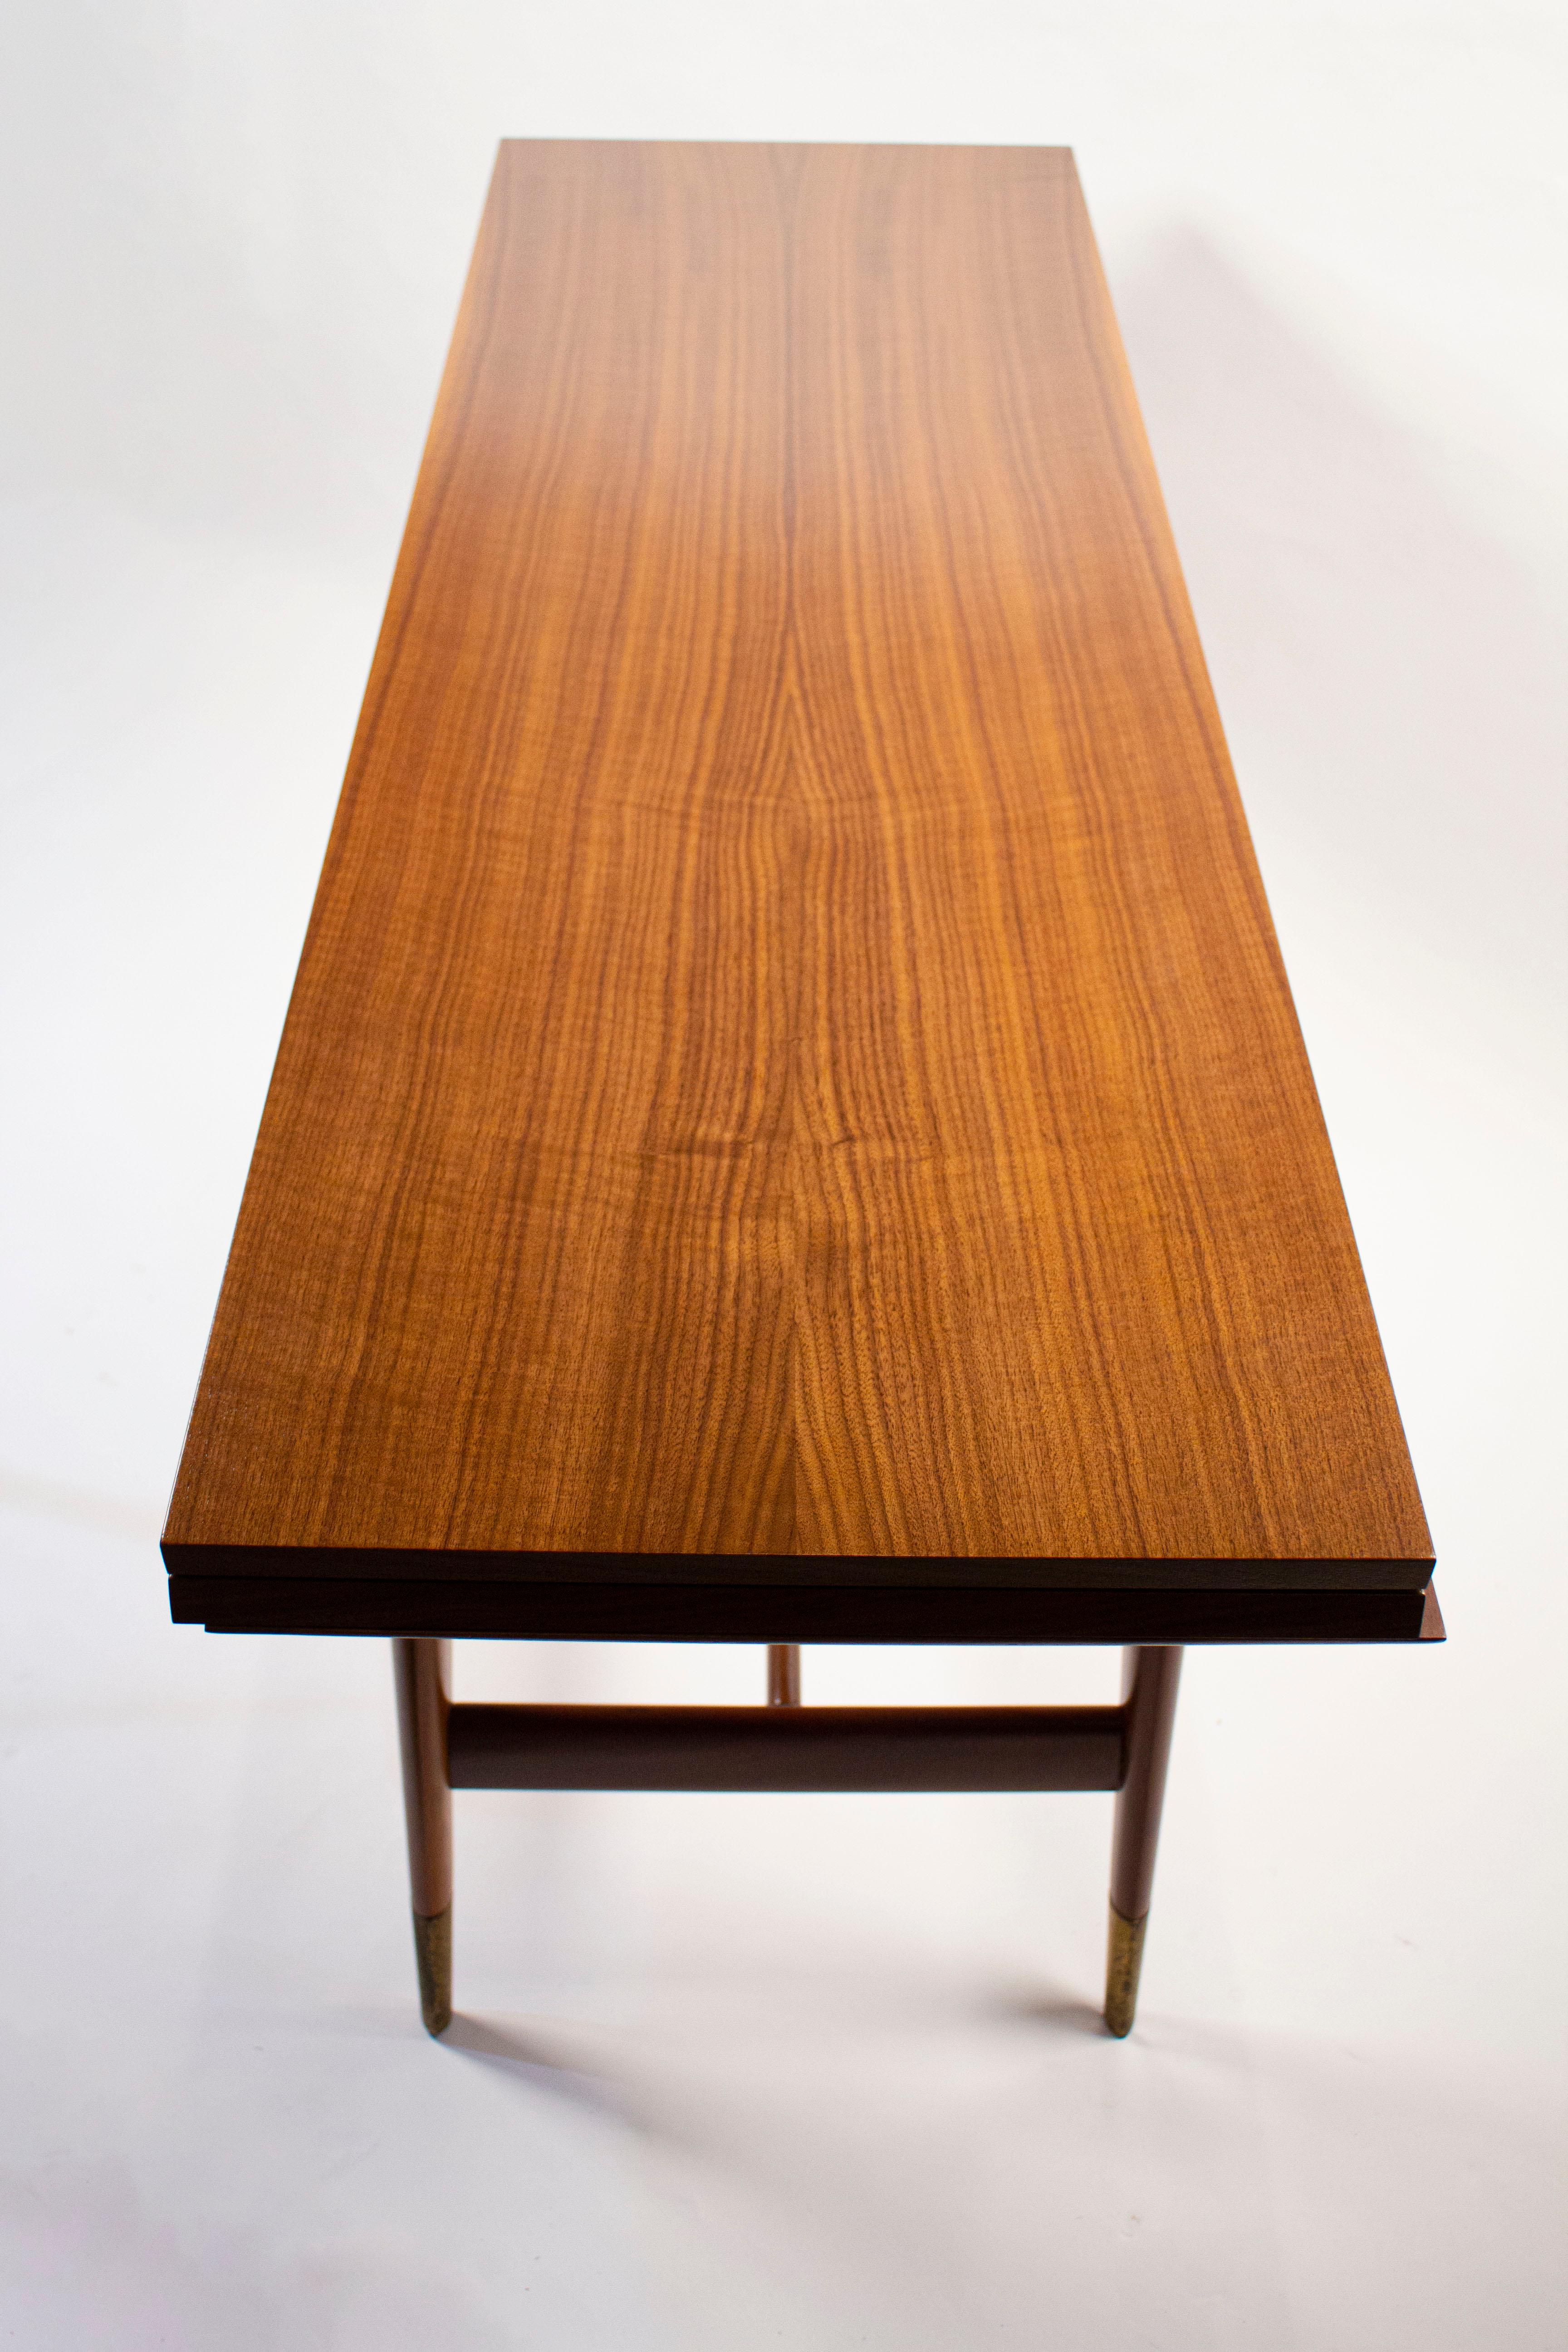 Gio Ponti Convertible Console / Dining Table for M. Singer & Sons in Walnut 1950 8